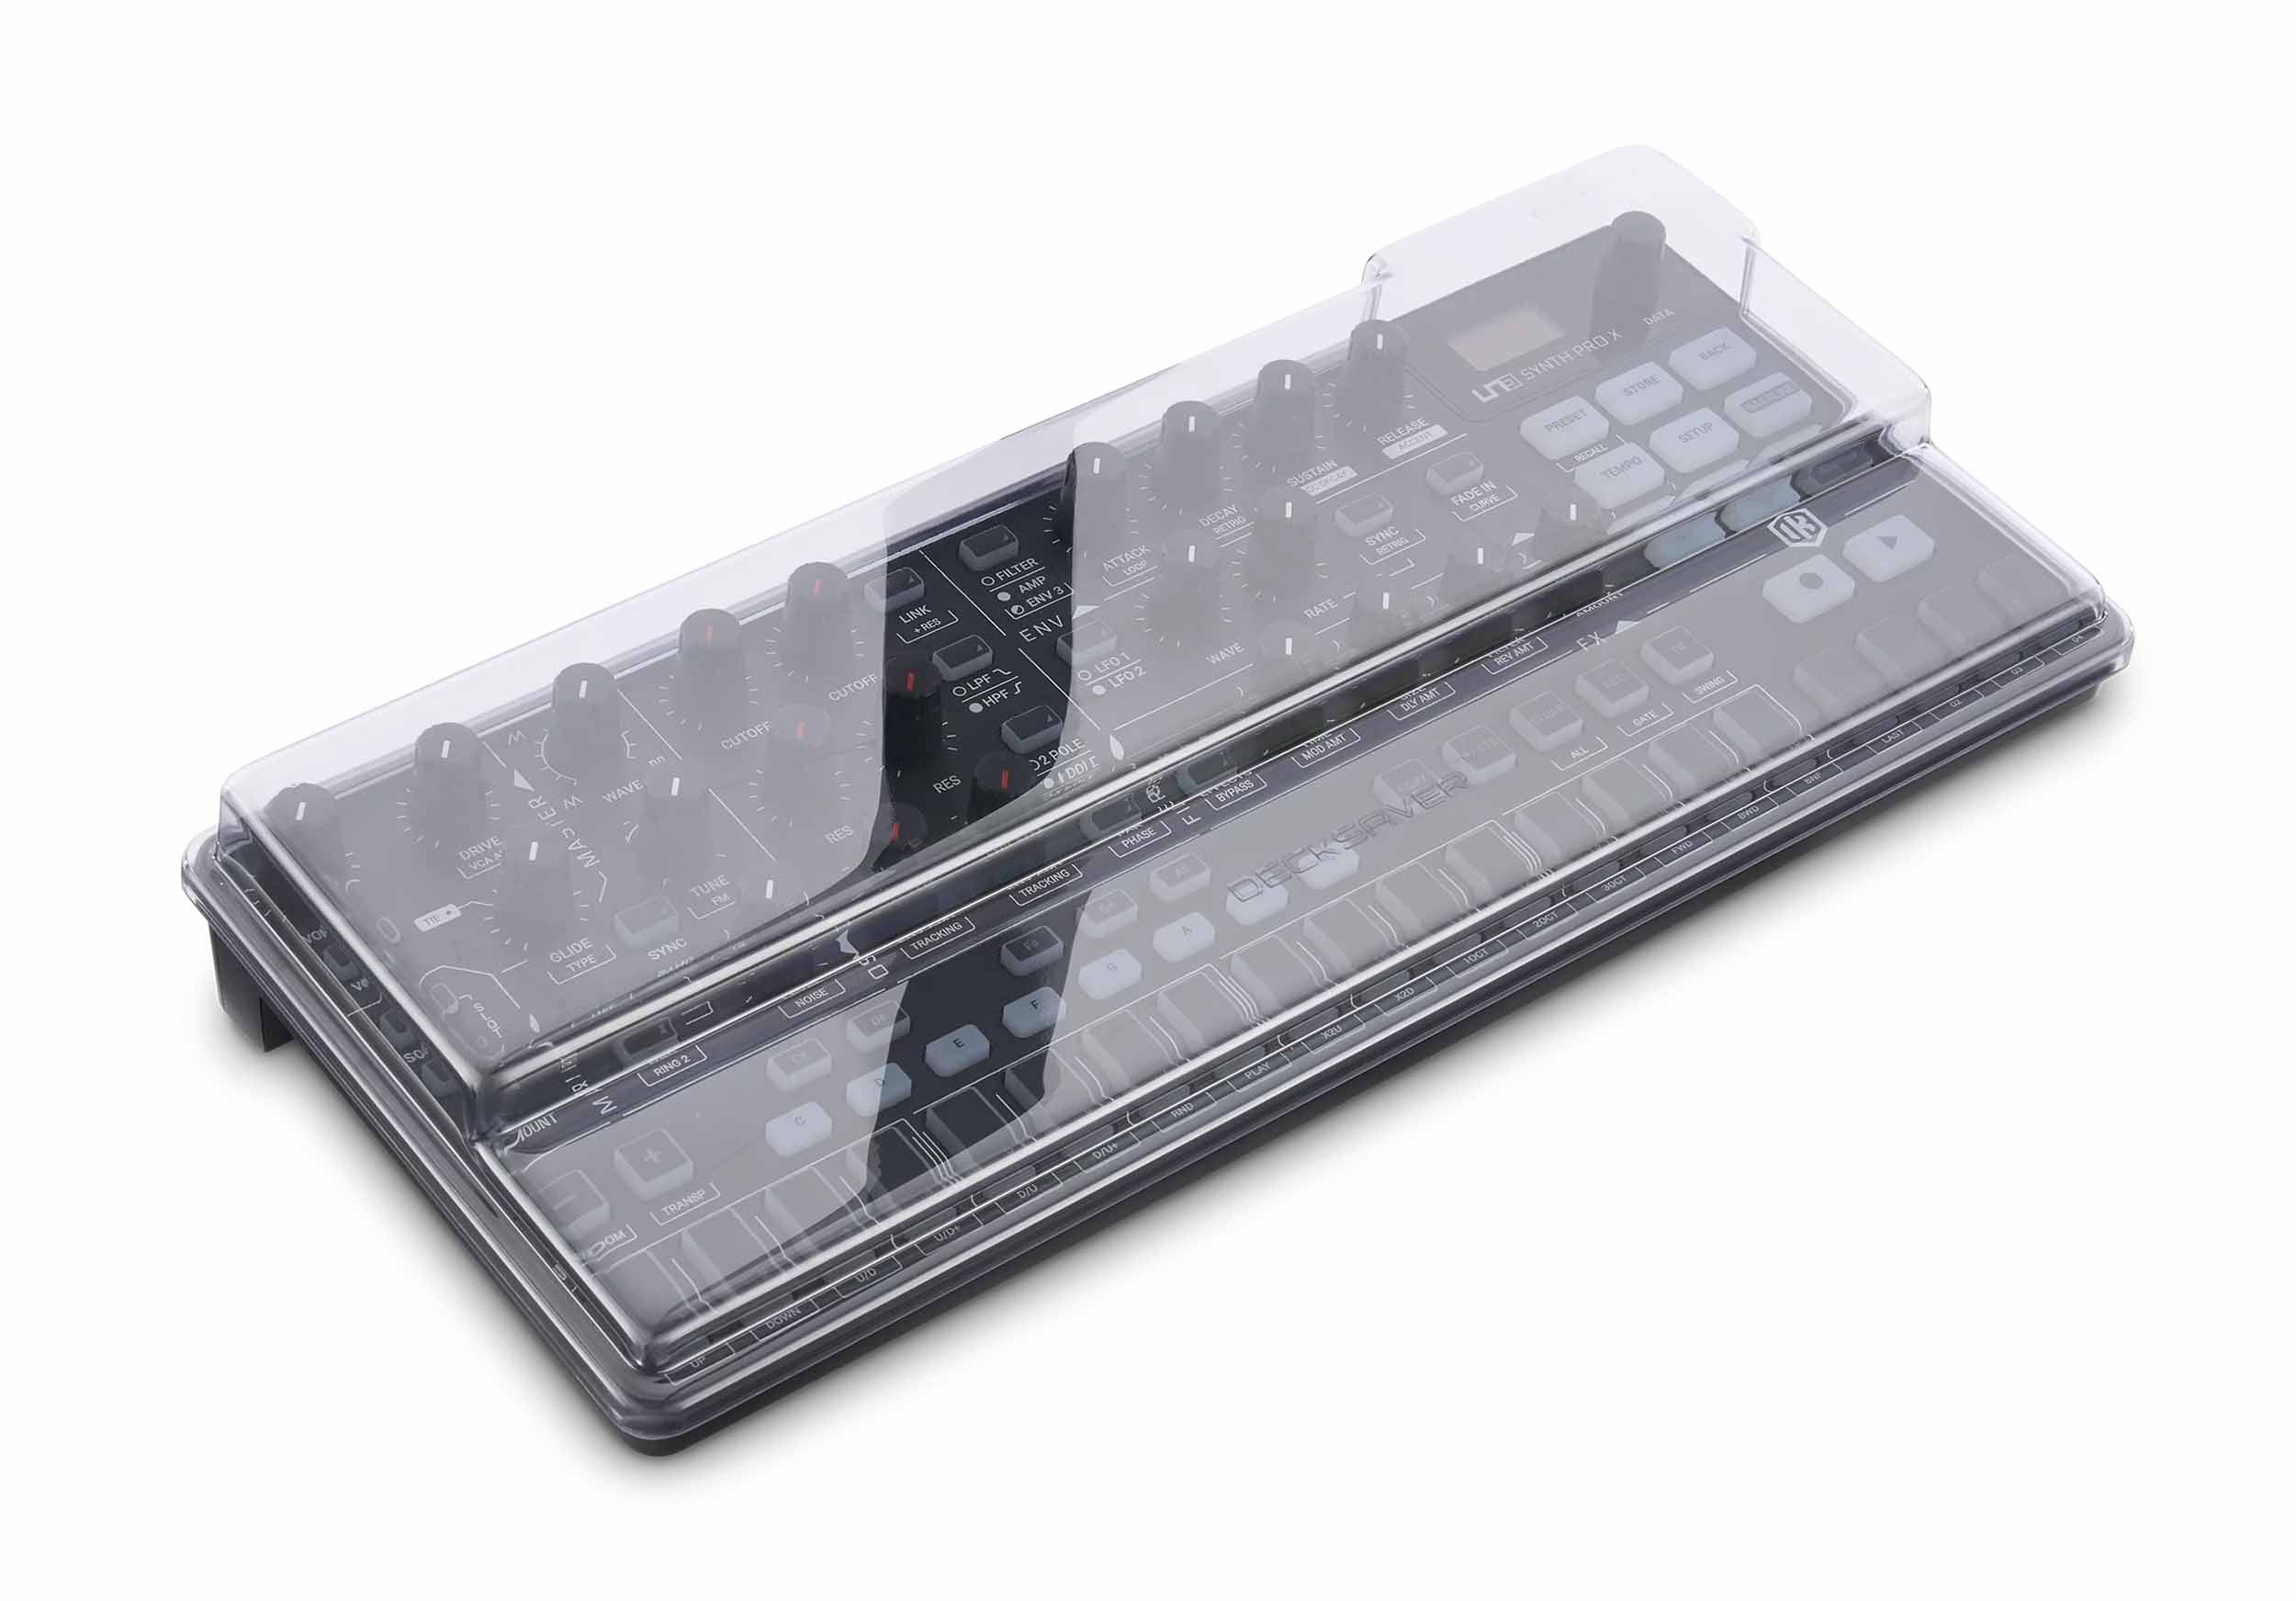 Decksaver DS-PC-UNOSYNTHPROX, Protection Cover for IK MULTIMEDIA UNO SYNTH PRO X Analog Synthesizer by Decksaver